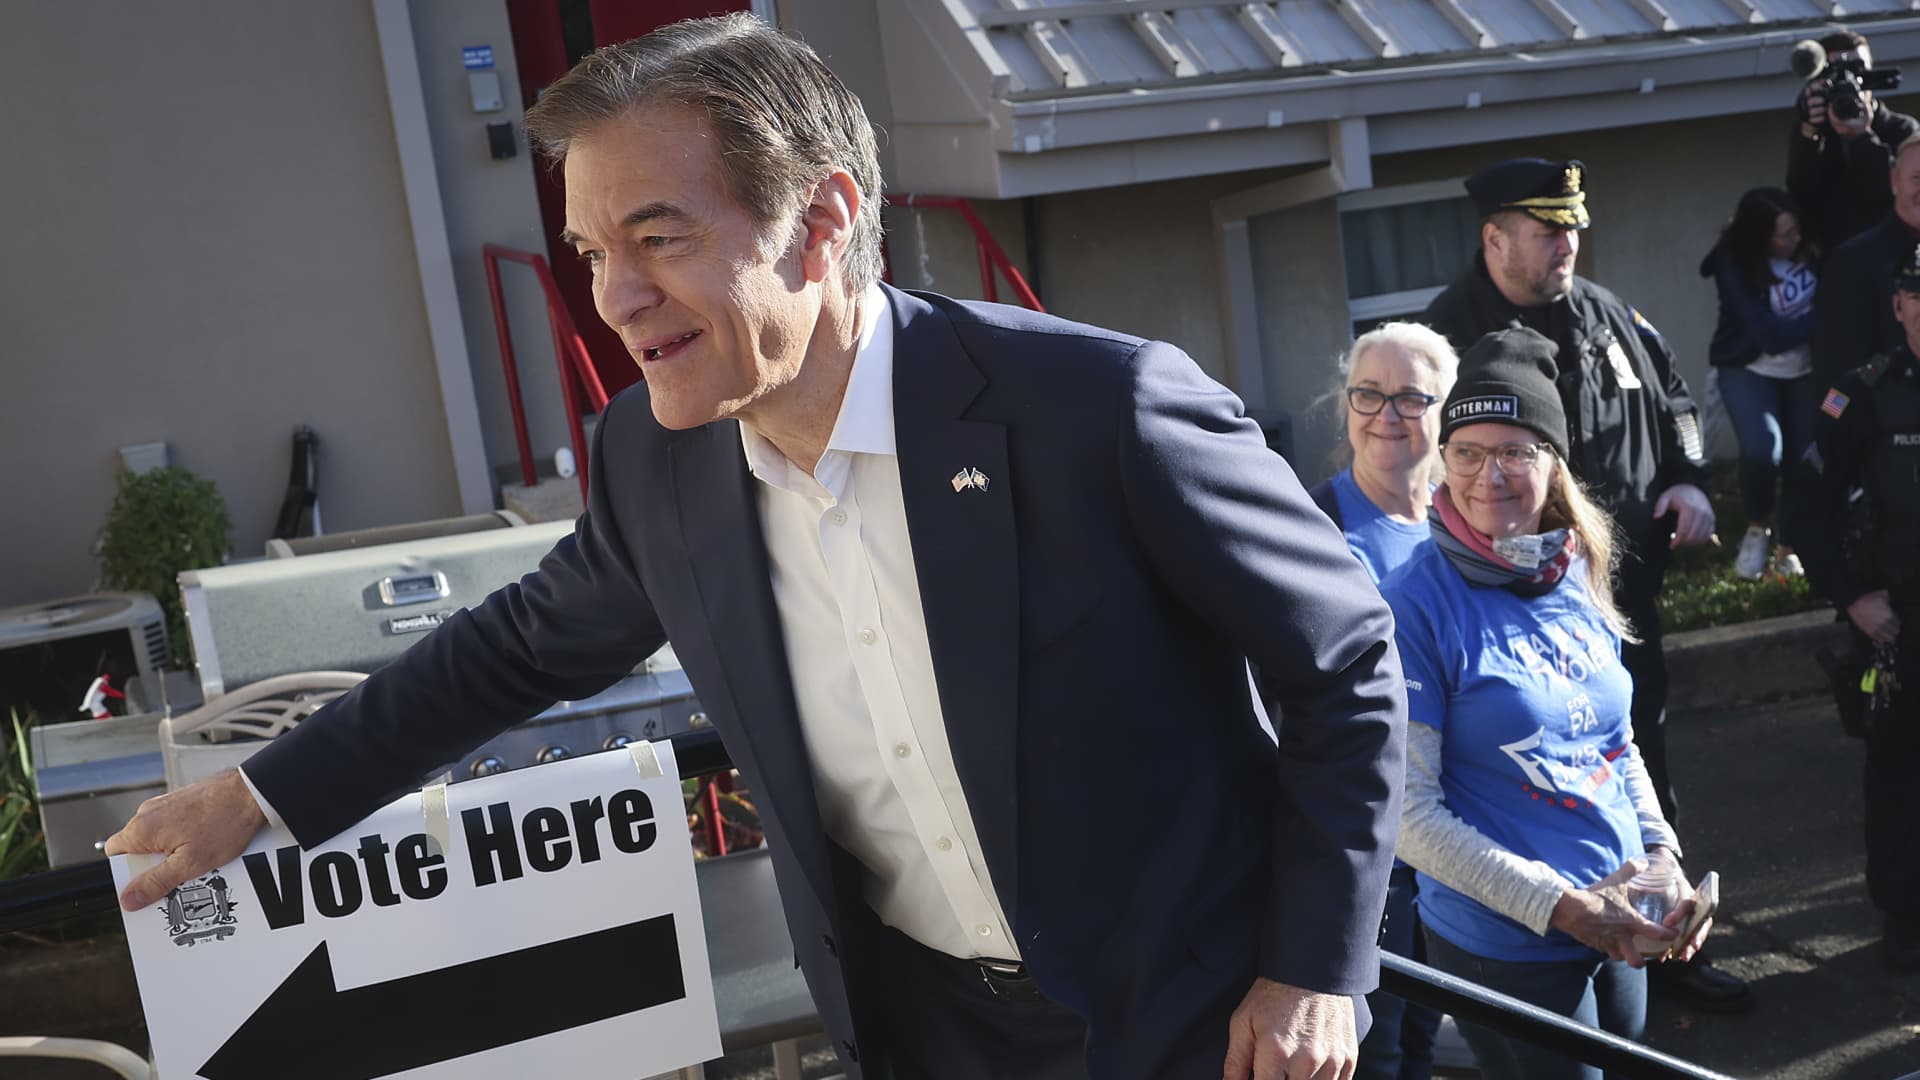 Republican U.S. Senate candidate Dr. Mehmet Oz enters the polling station at the Bryn Athyn Borough Hall to cast his ballot on November 8, 2022 in Huntingdon Valley, Pennsylvania.